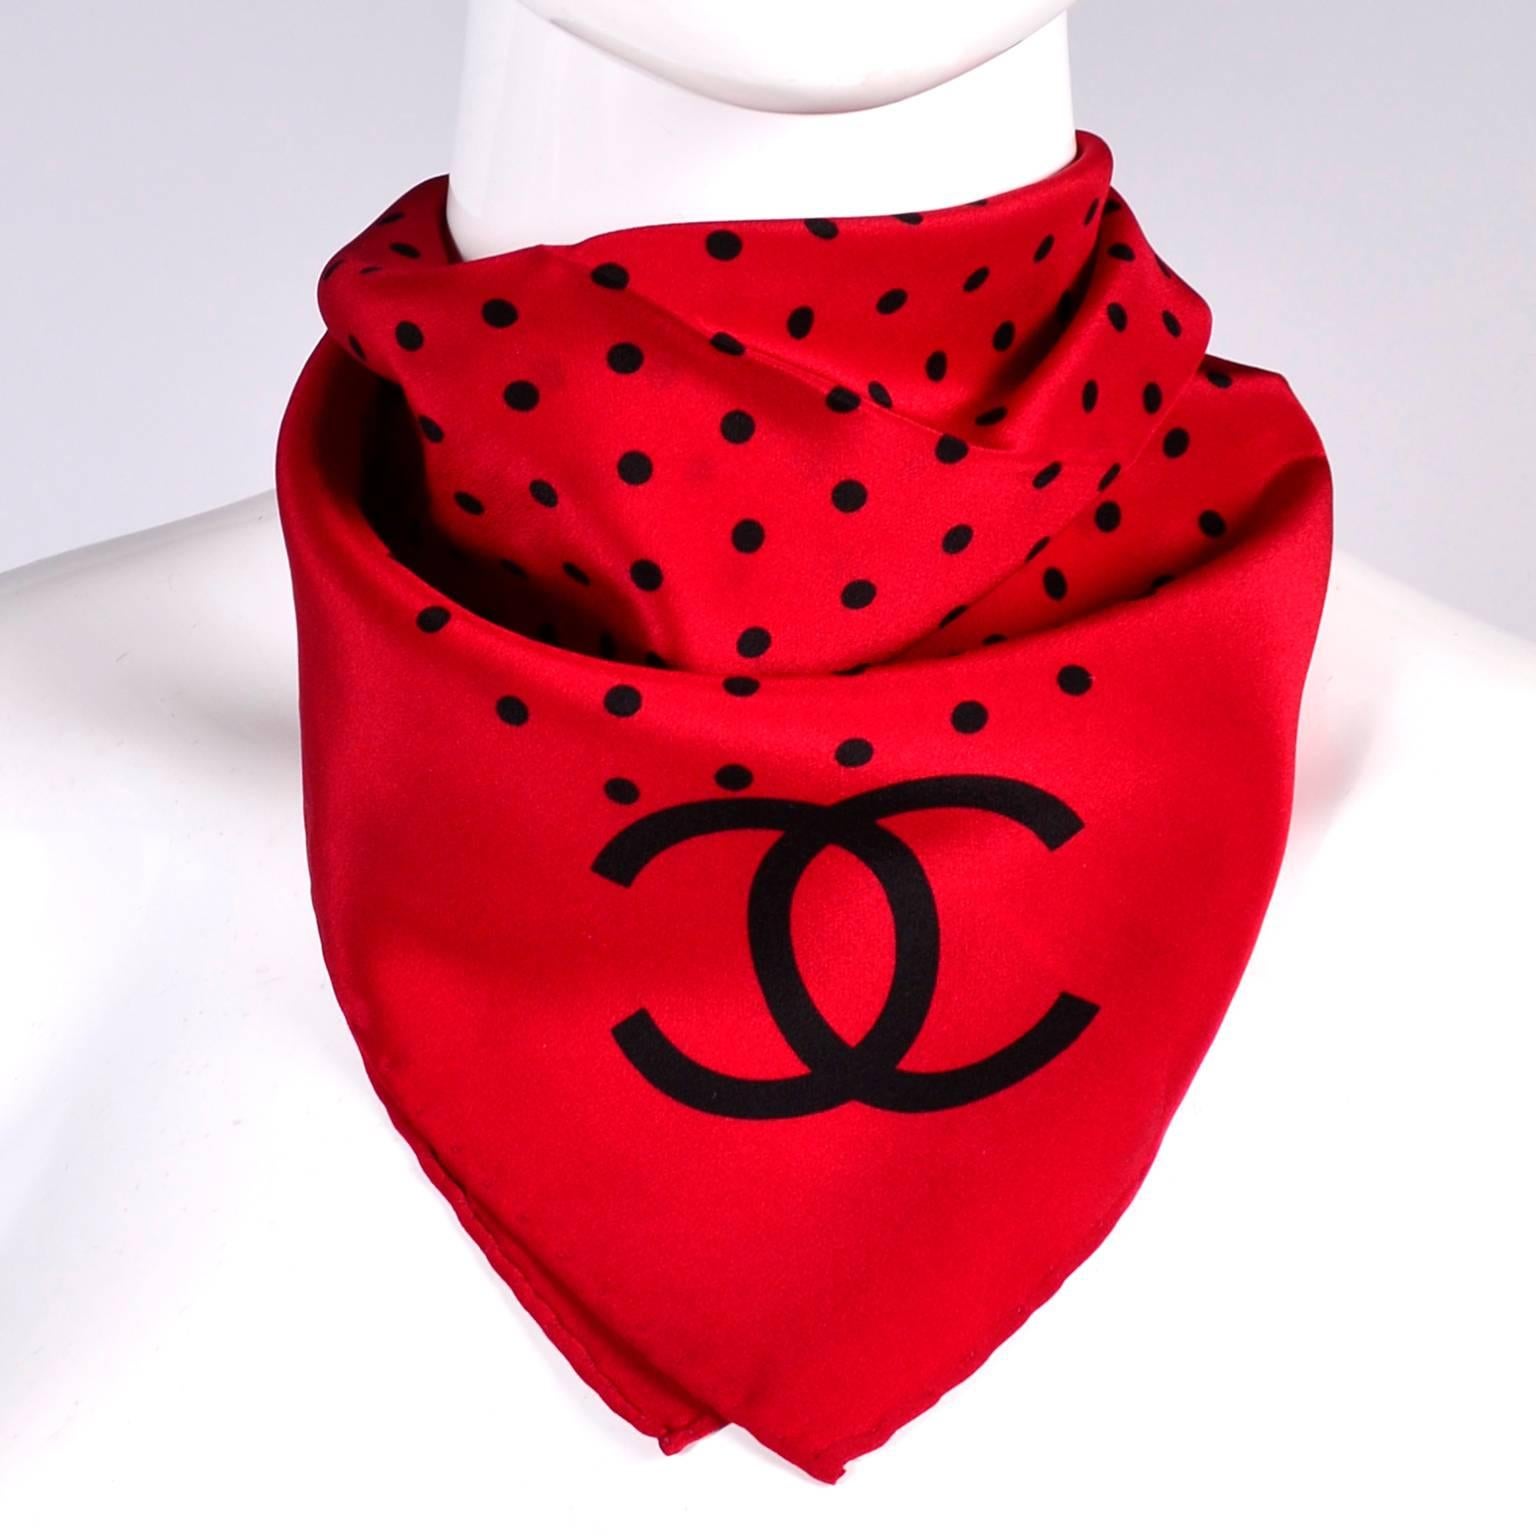 This is a beautiful red silk Chanel scarf with black polka dots and the CC logo. This scarf would make a great gift and is a perfect neck scarf to wear under a jacket or blouse.  